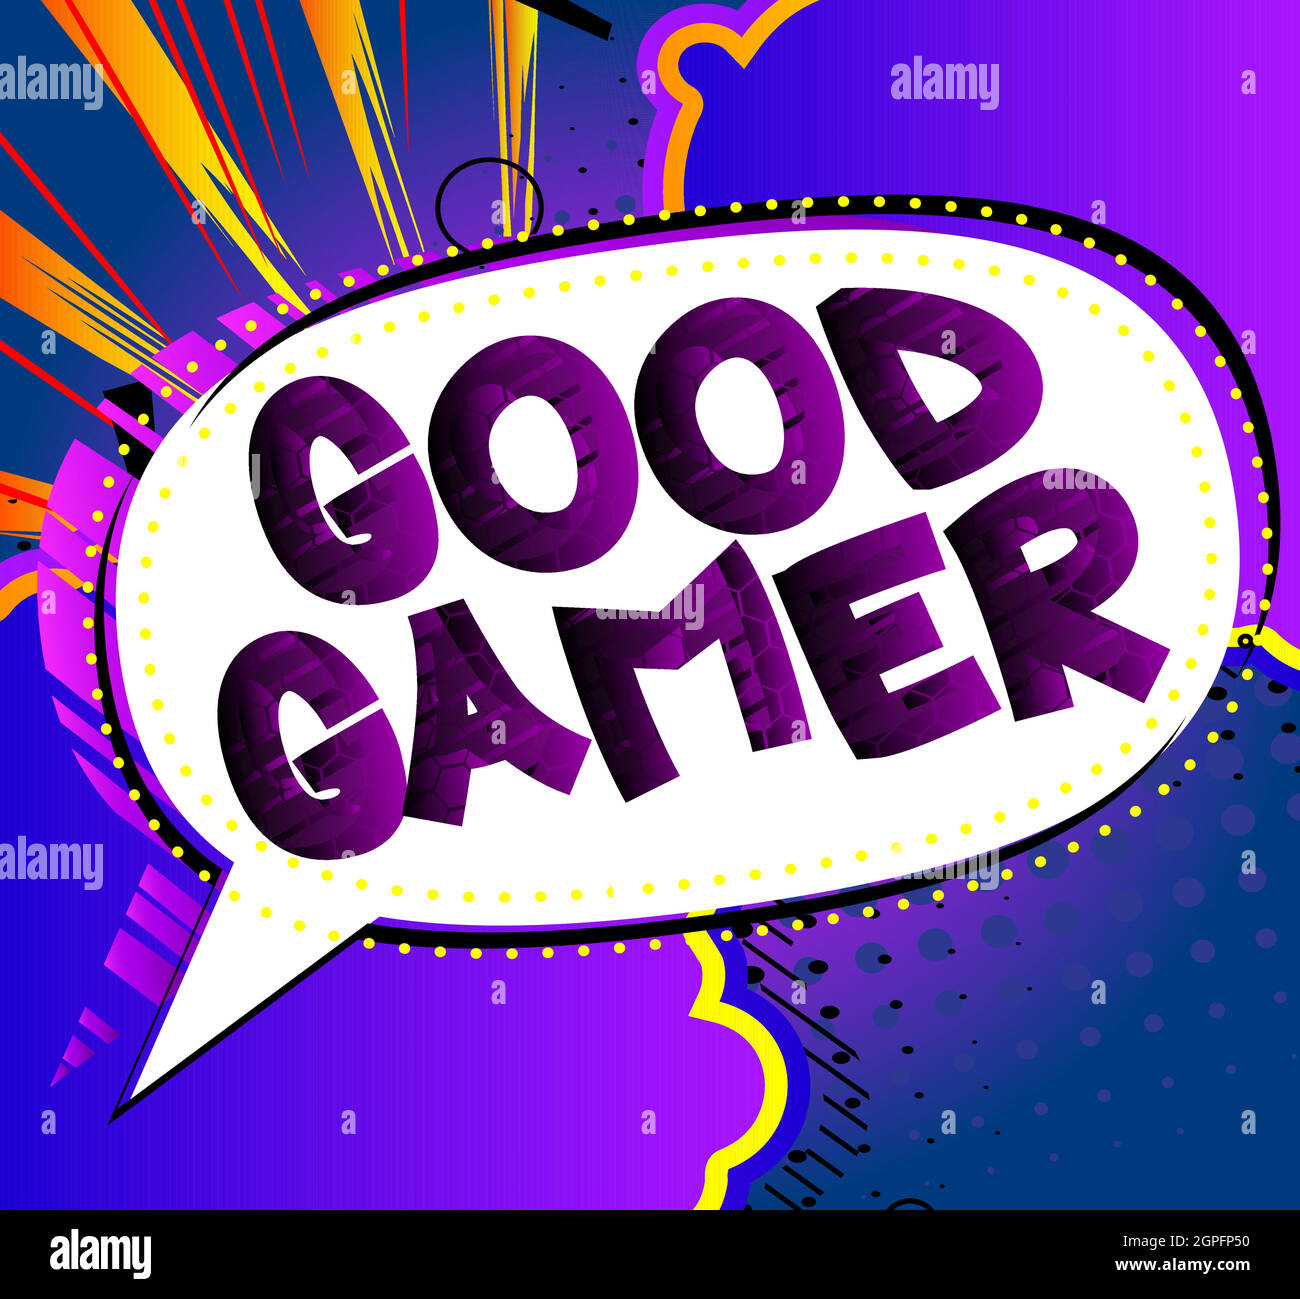 Pc or Console gaming, Gamer related words, quote. Stock Vector